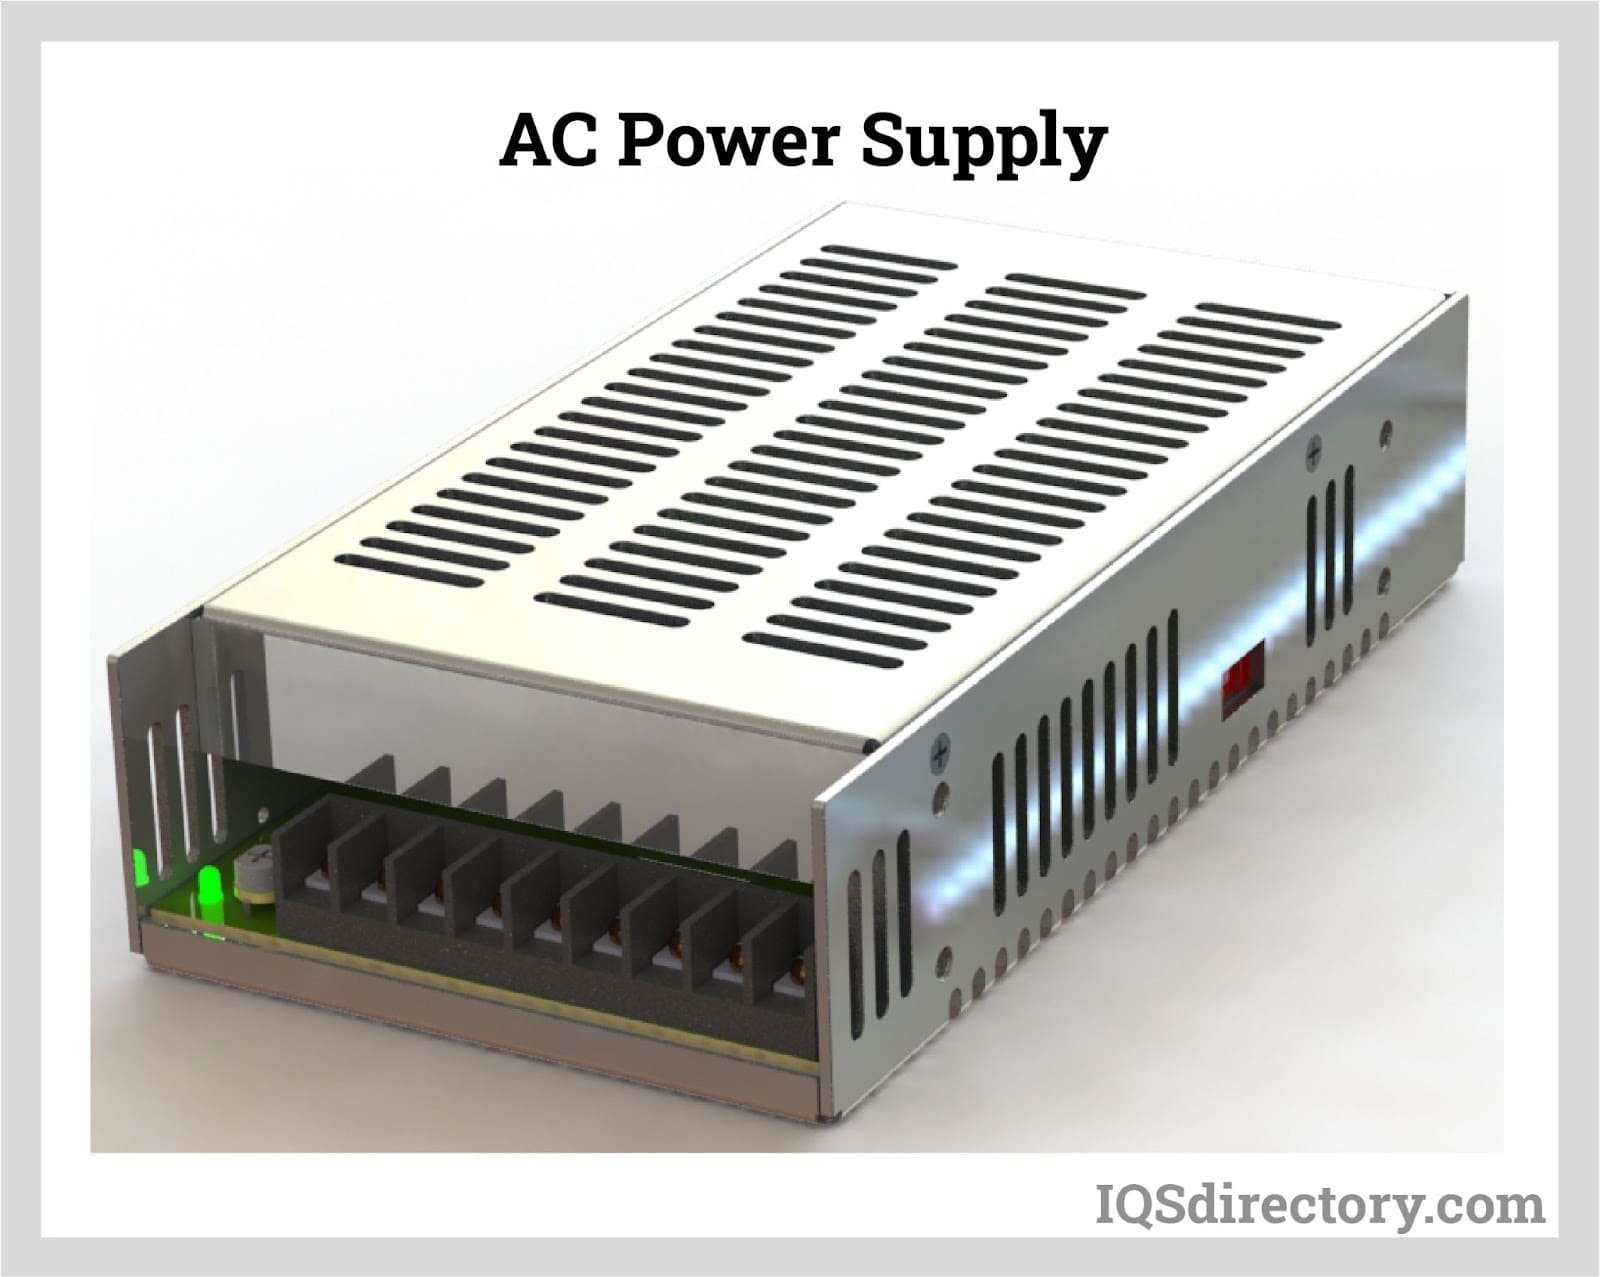 Step Down DC-DC Converter for High Current Use-Power Supply Units